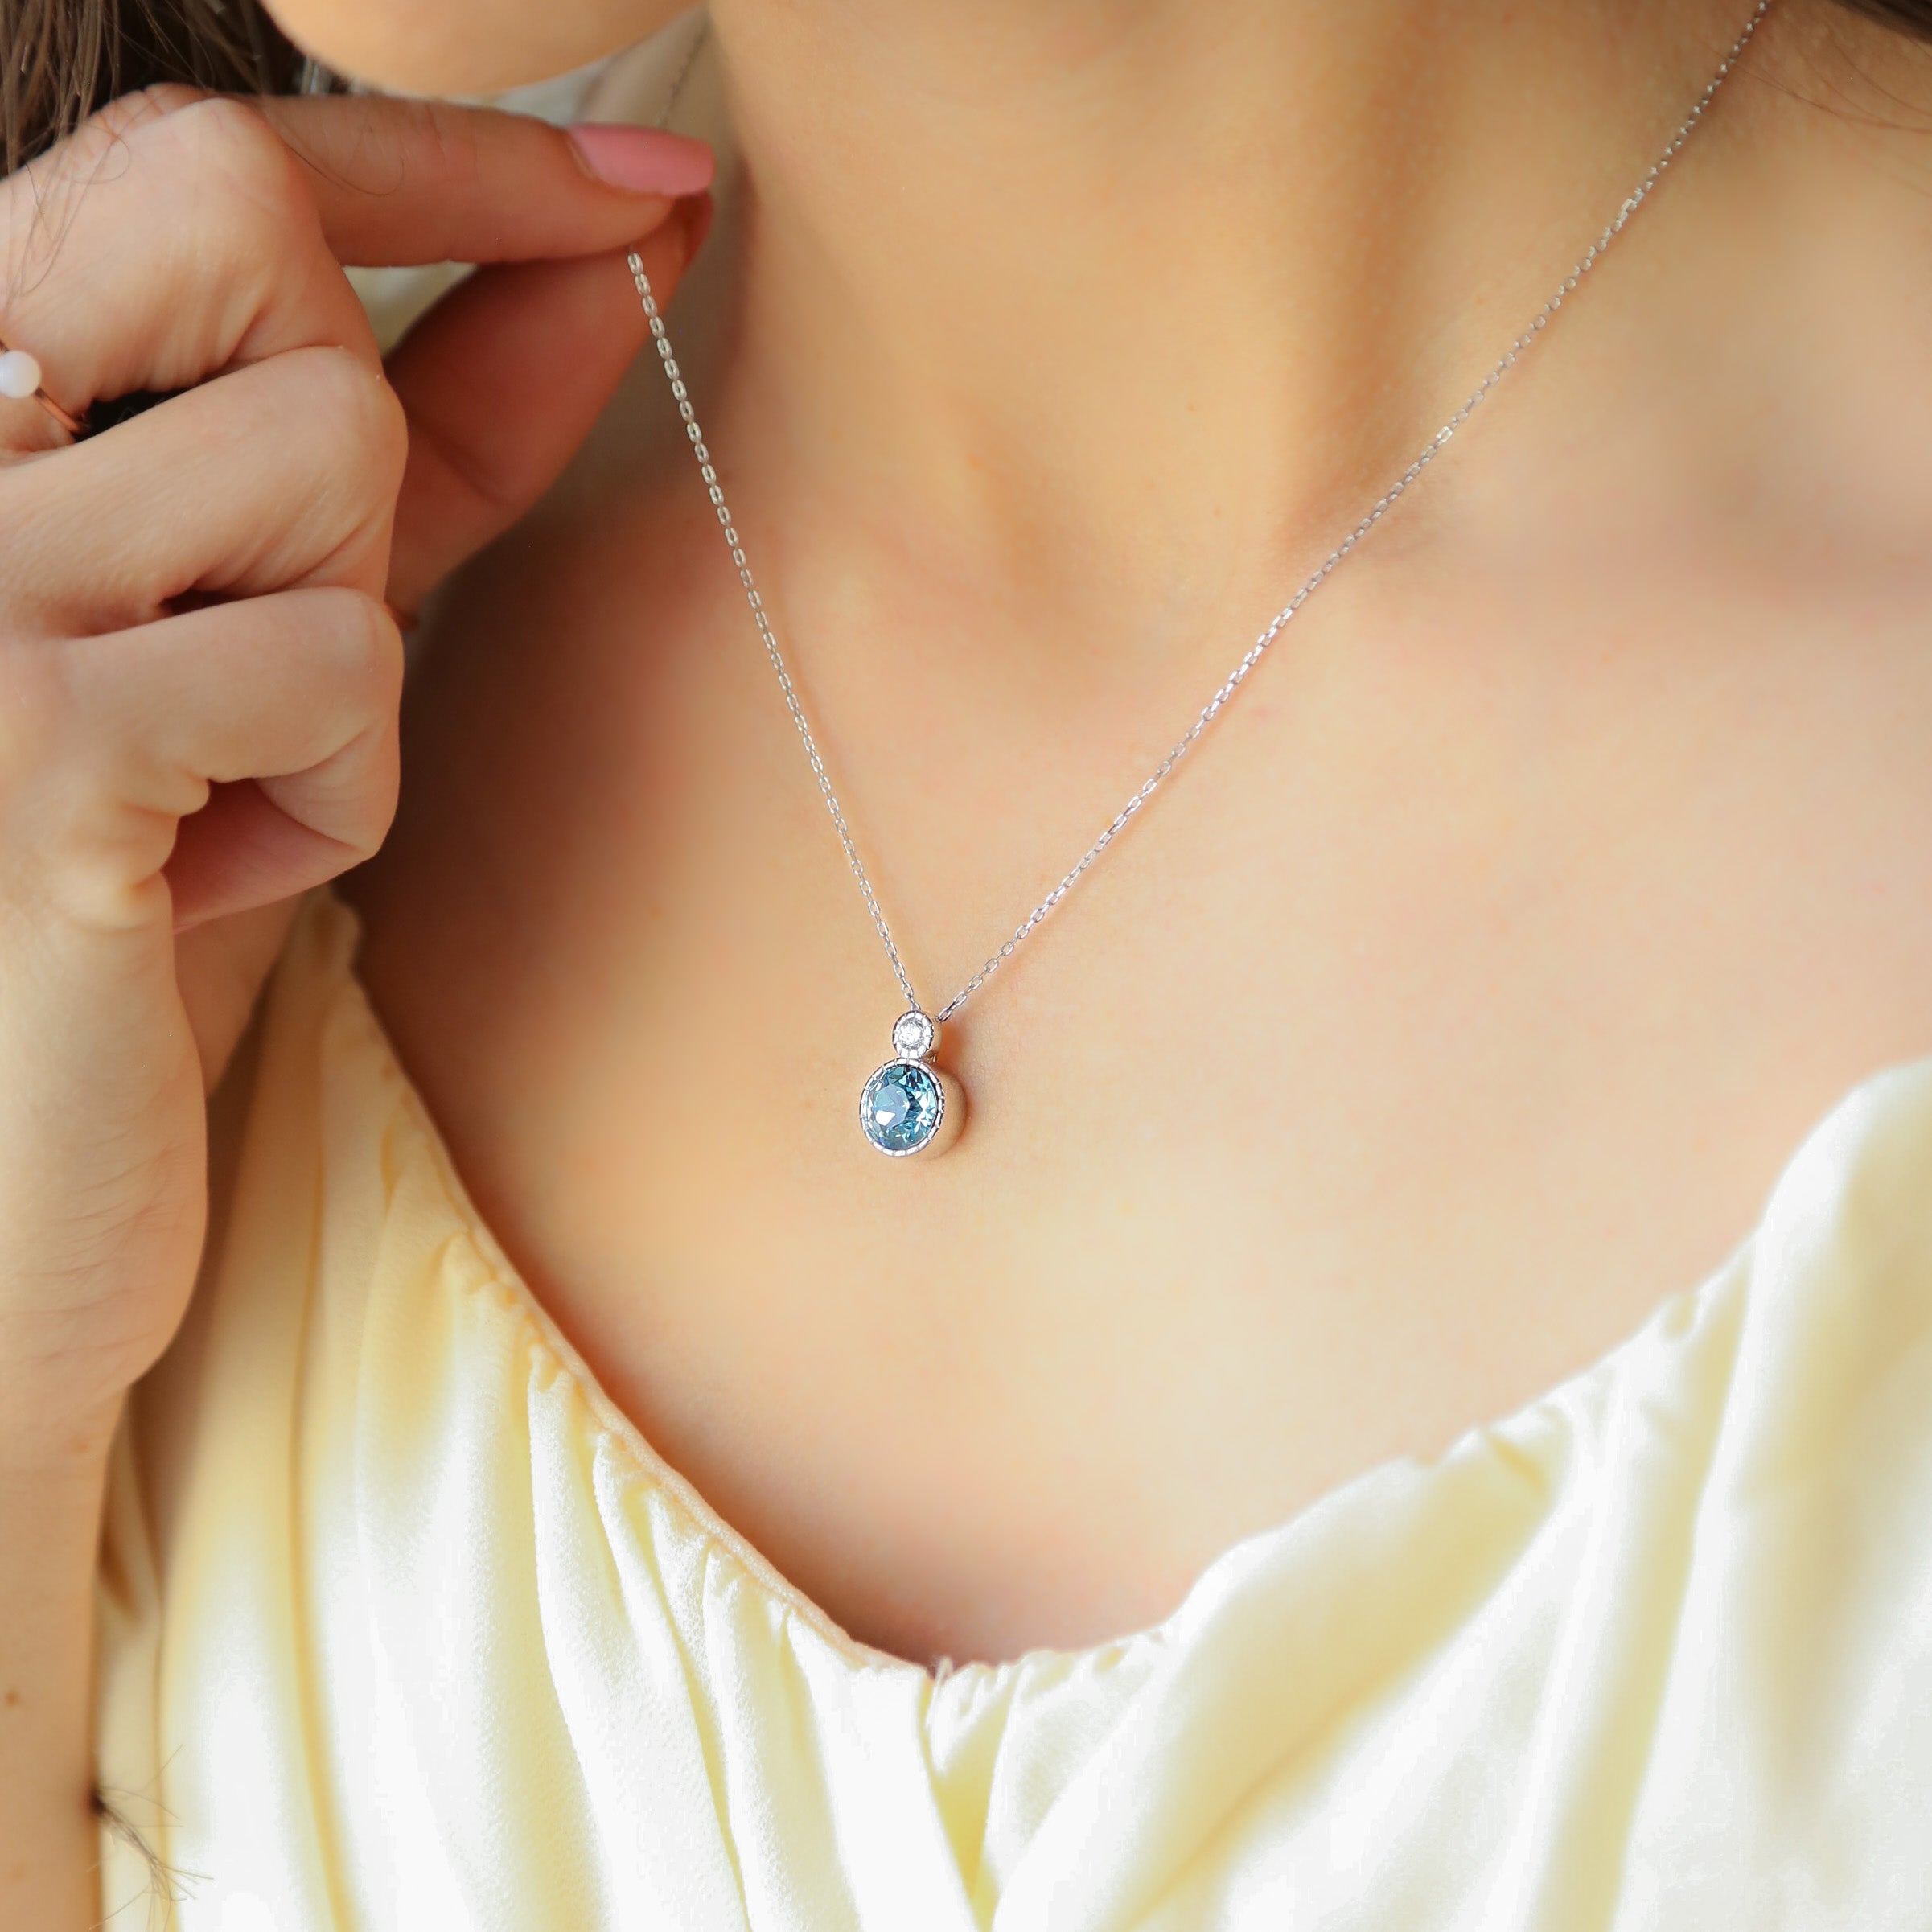 DIANA - Sterilng Silver Necklace with Blue or Pink Zircon